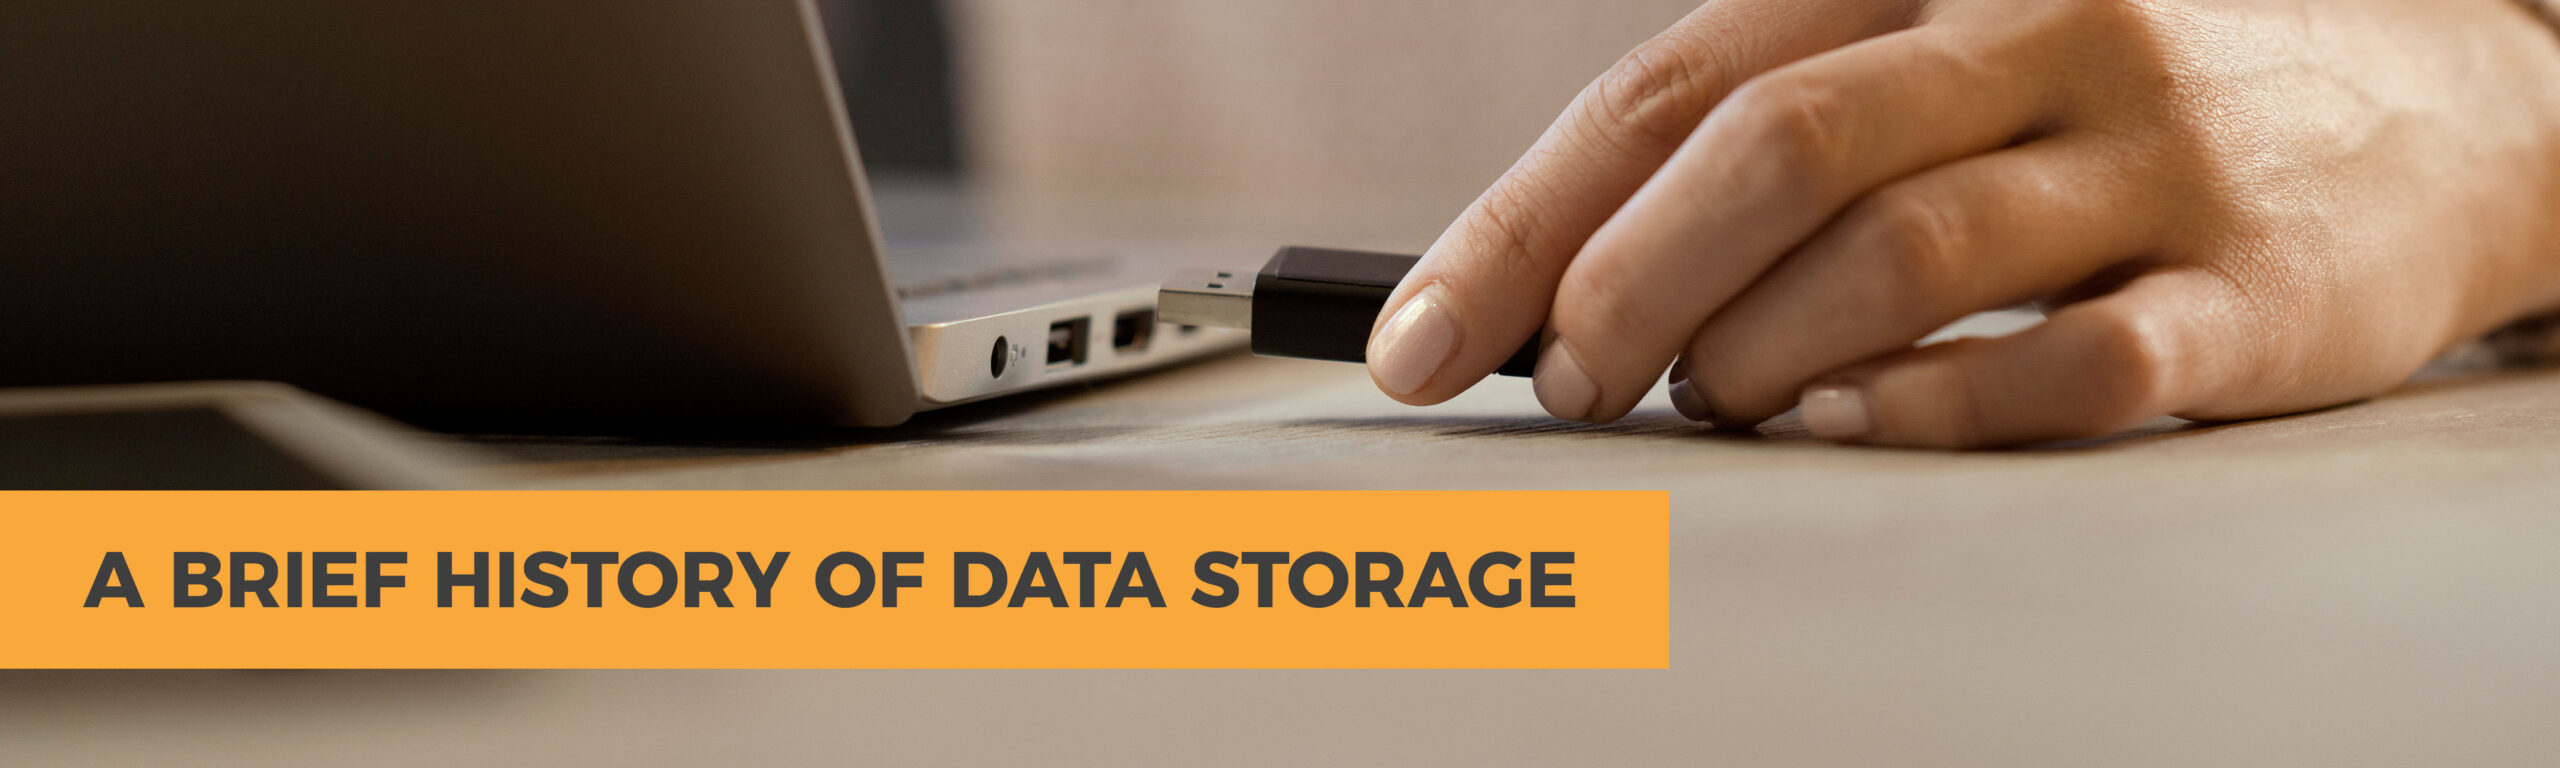 A Brief History of Data Storage